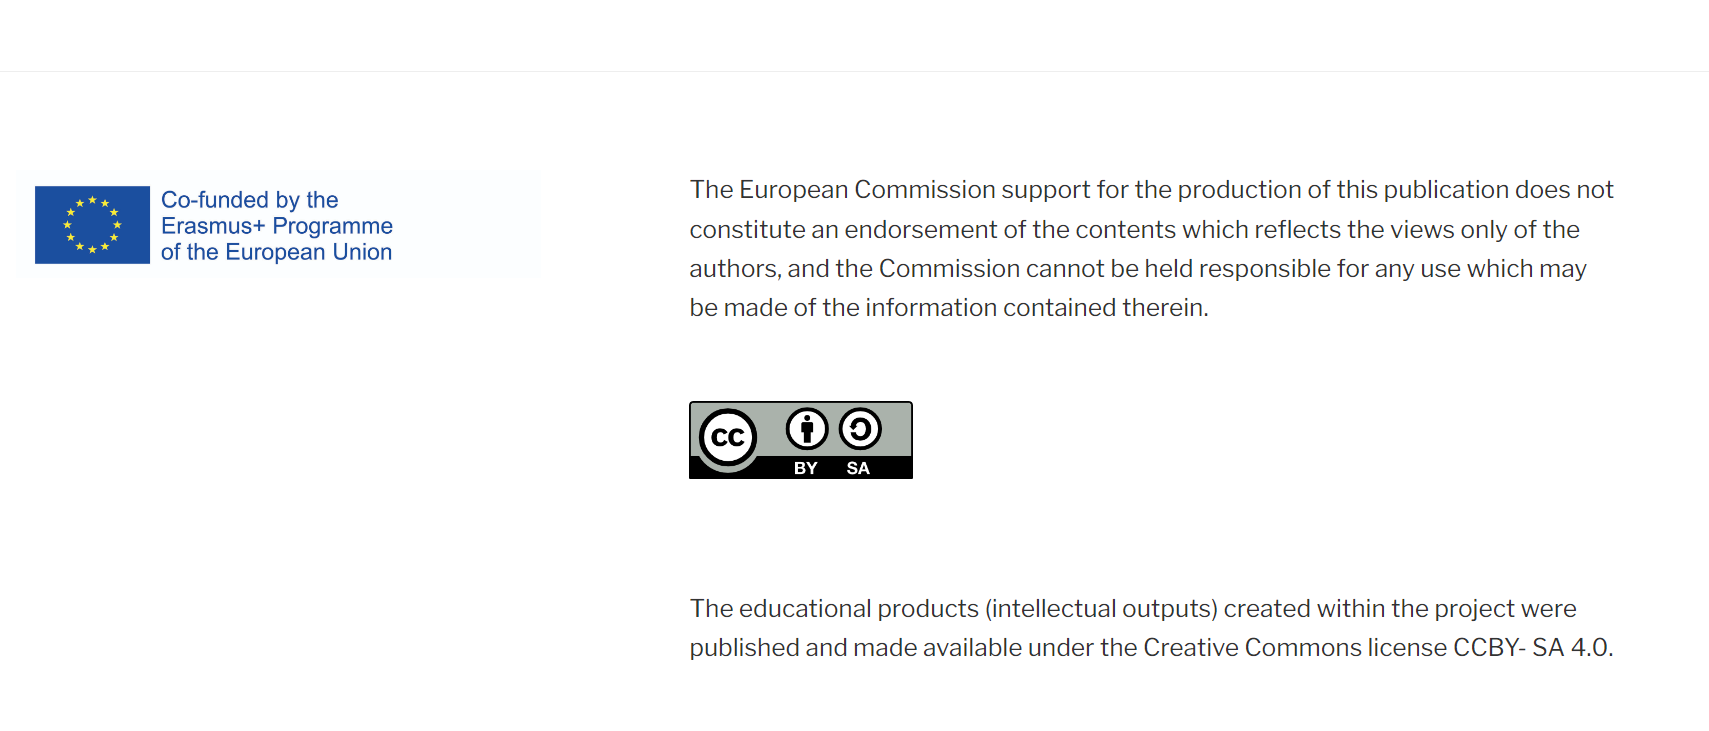 The educational products (intellectual outputs) created within the project were published and made available under CCBYSA